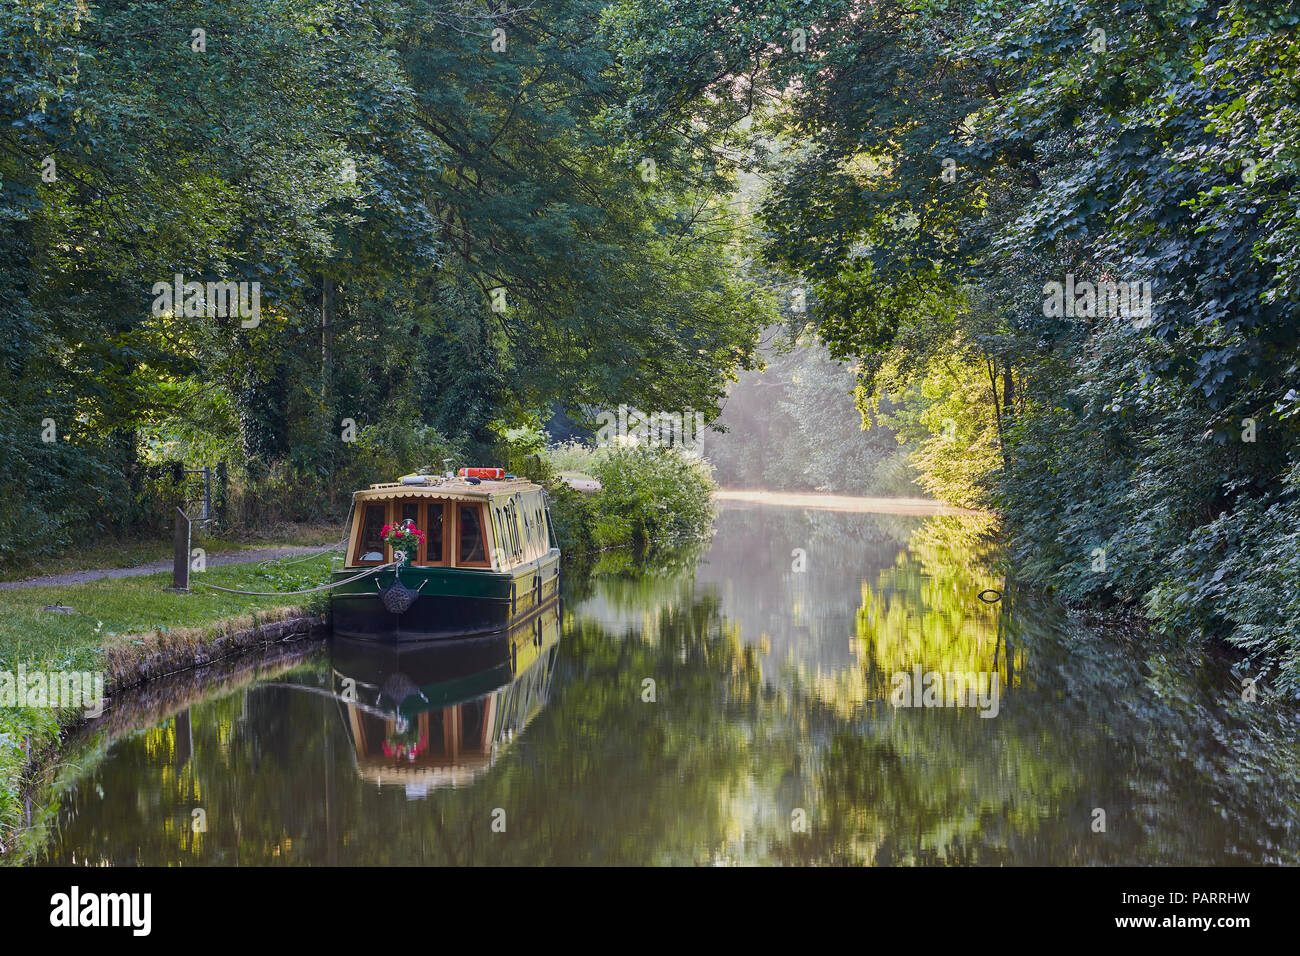 A barge moored against the bank of the Monmouthshire and Brecon canal in early summer near Llangynidr, Powys, Mid Wales, UK Stock Photo